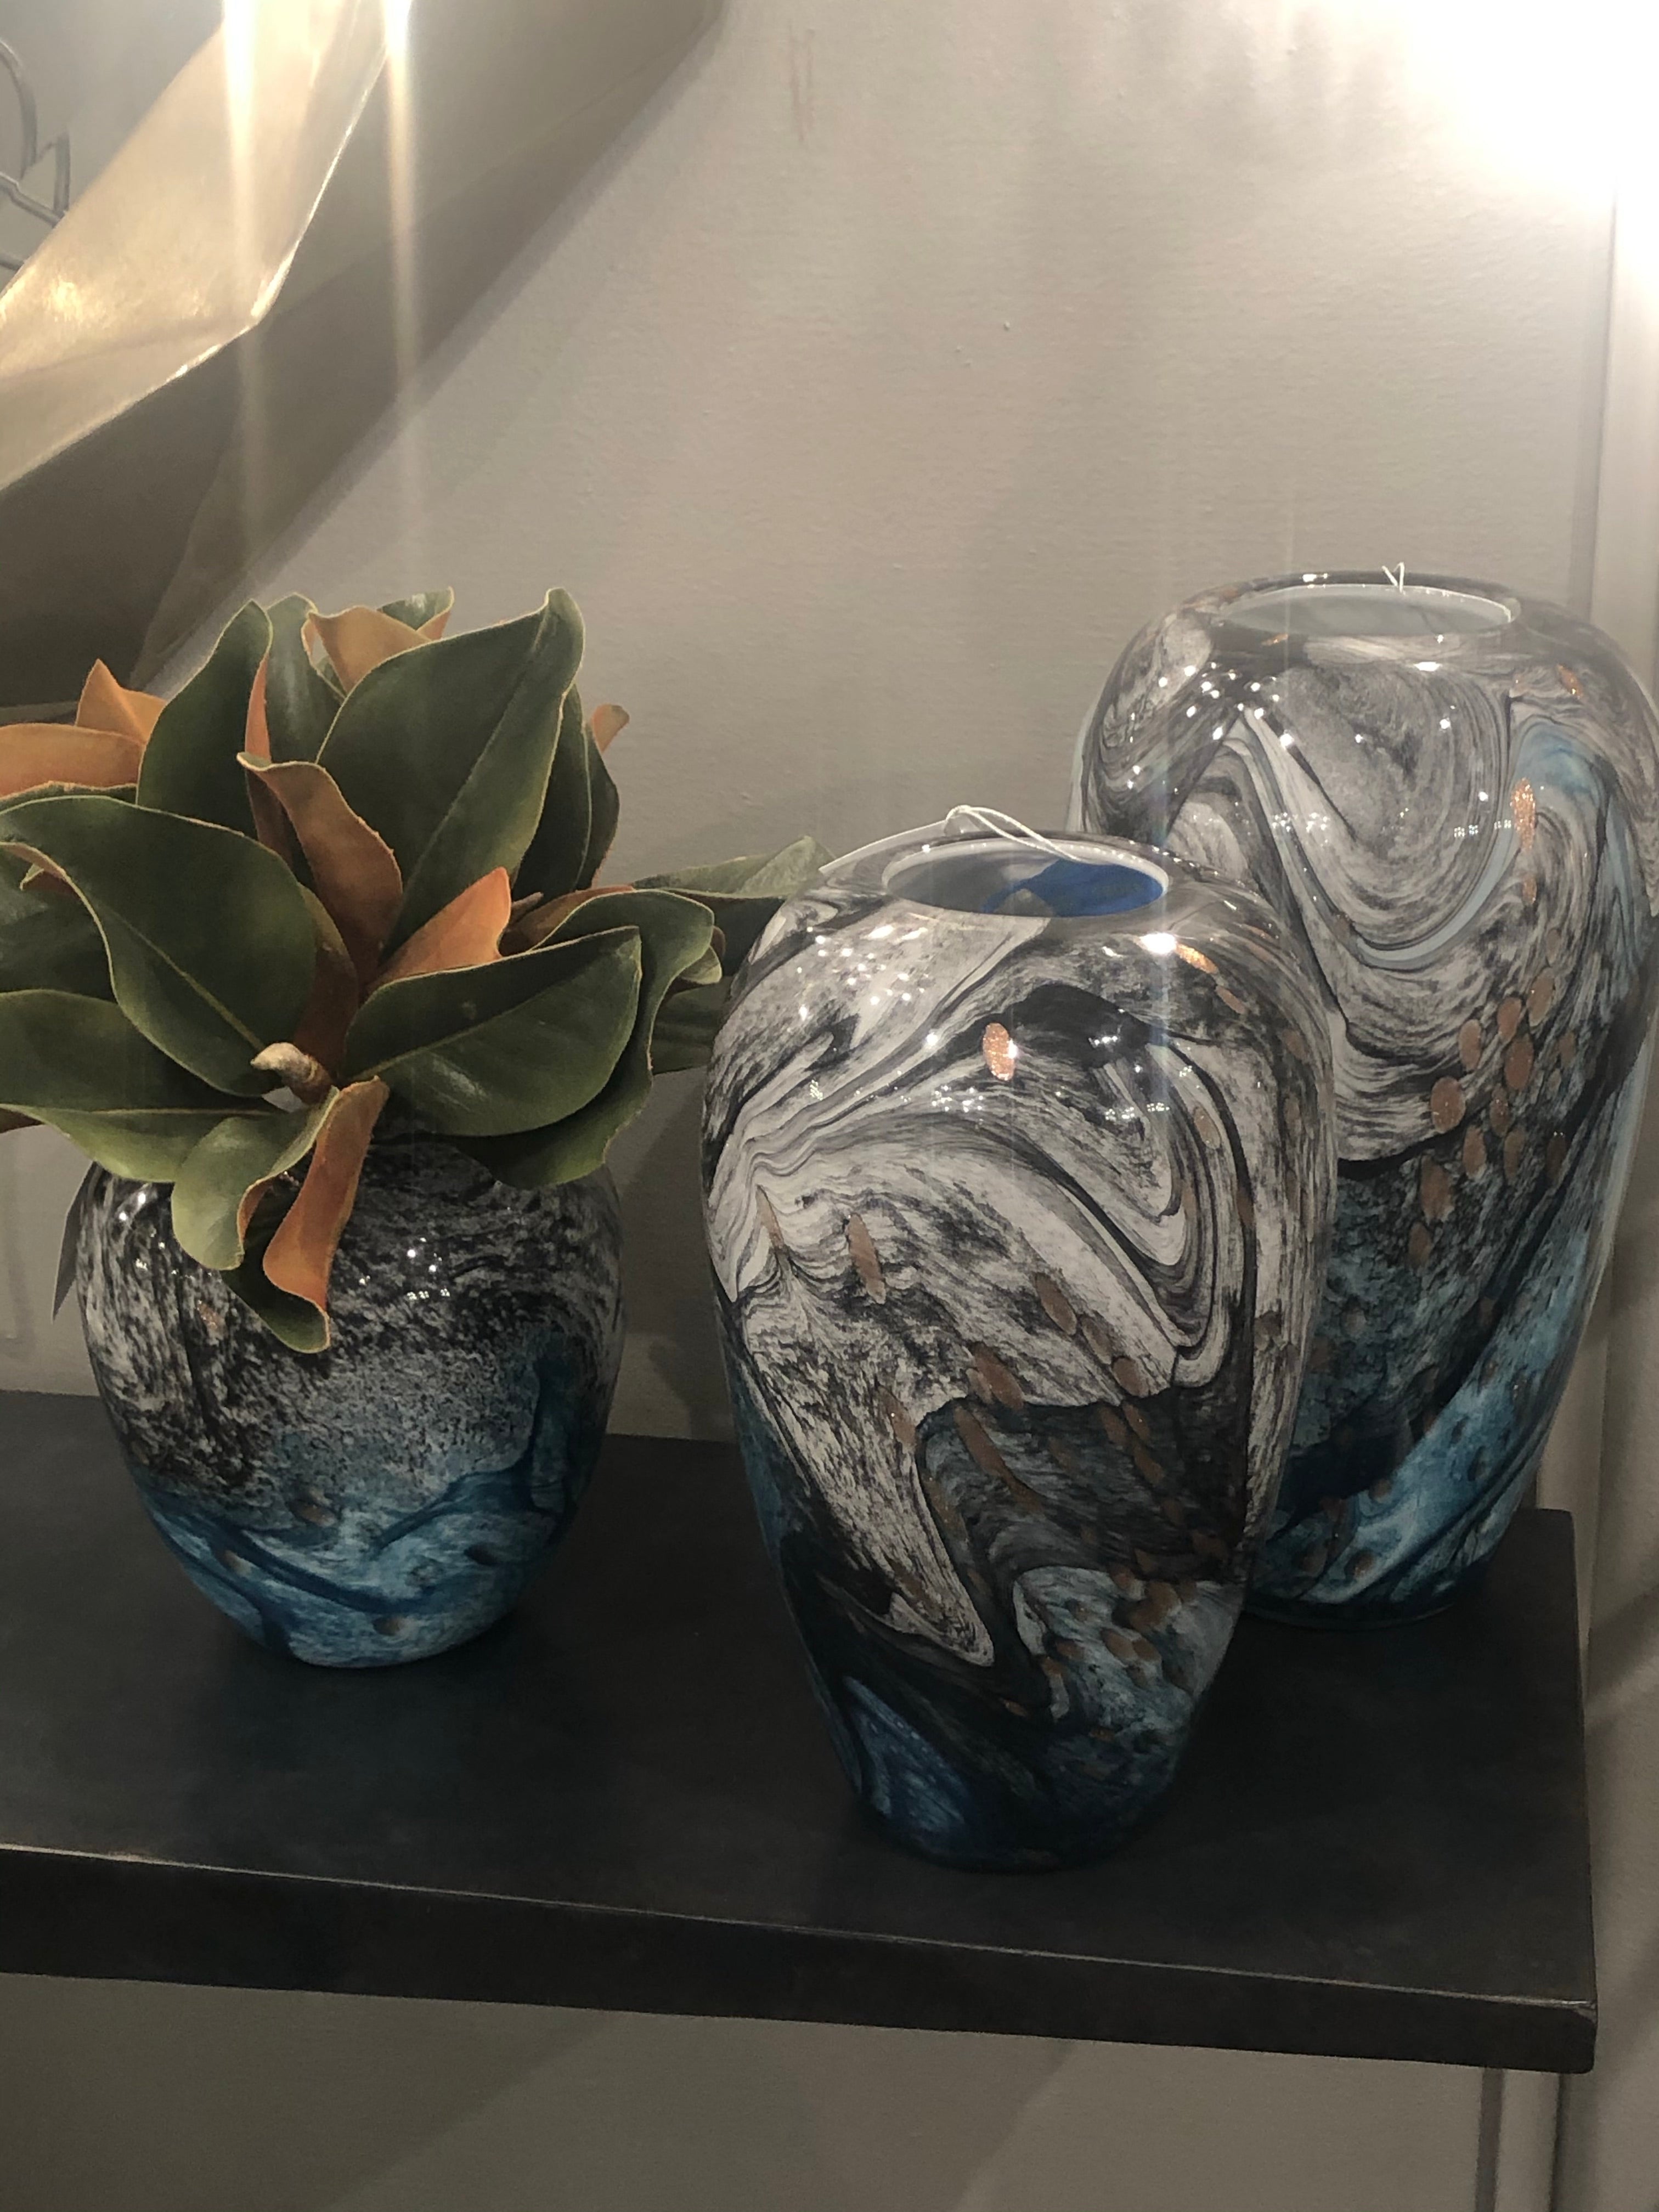 Color can make your space stand out, especially when displayed in unique patterns and formations. For this reason, the Prismatic tabletop vase is sure to add an instant boost to your design plans. Coated in a stunning multicolored gradient finish, this bud-shaped vessel showcases blue, green, grey, and gold splashes. Available in three size options, these rounded vases can create a head-turning display on your dining room table, living room coffee table, or any office bookshelf display  ETA: 5/20/22